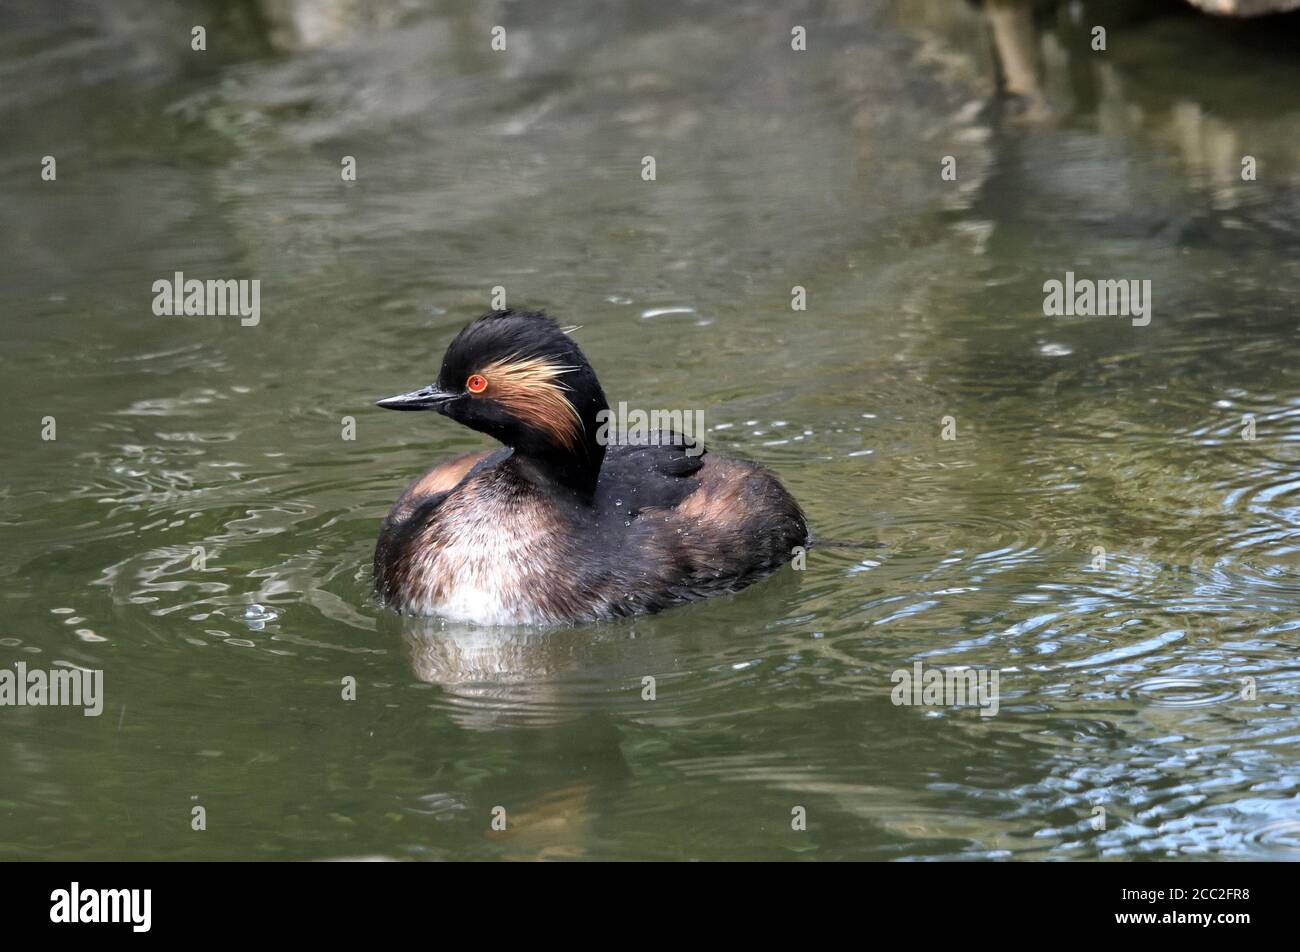 A Black-necked Grebe (Podiceps nigricollis) swimming on a small lake in Southern England Stock Photo